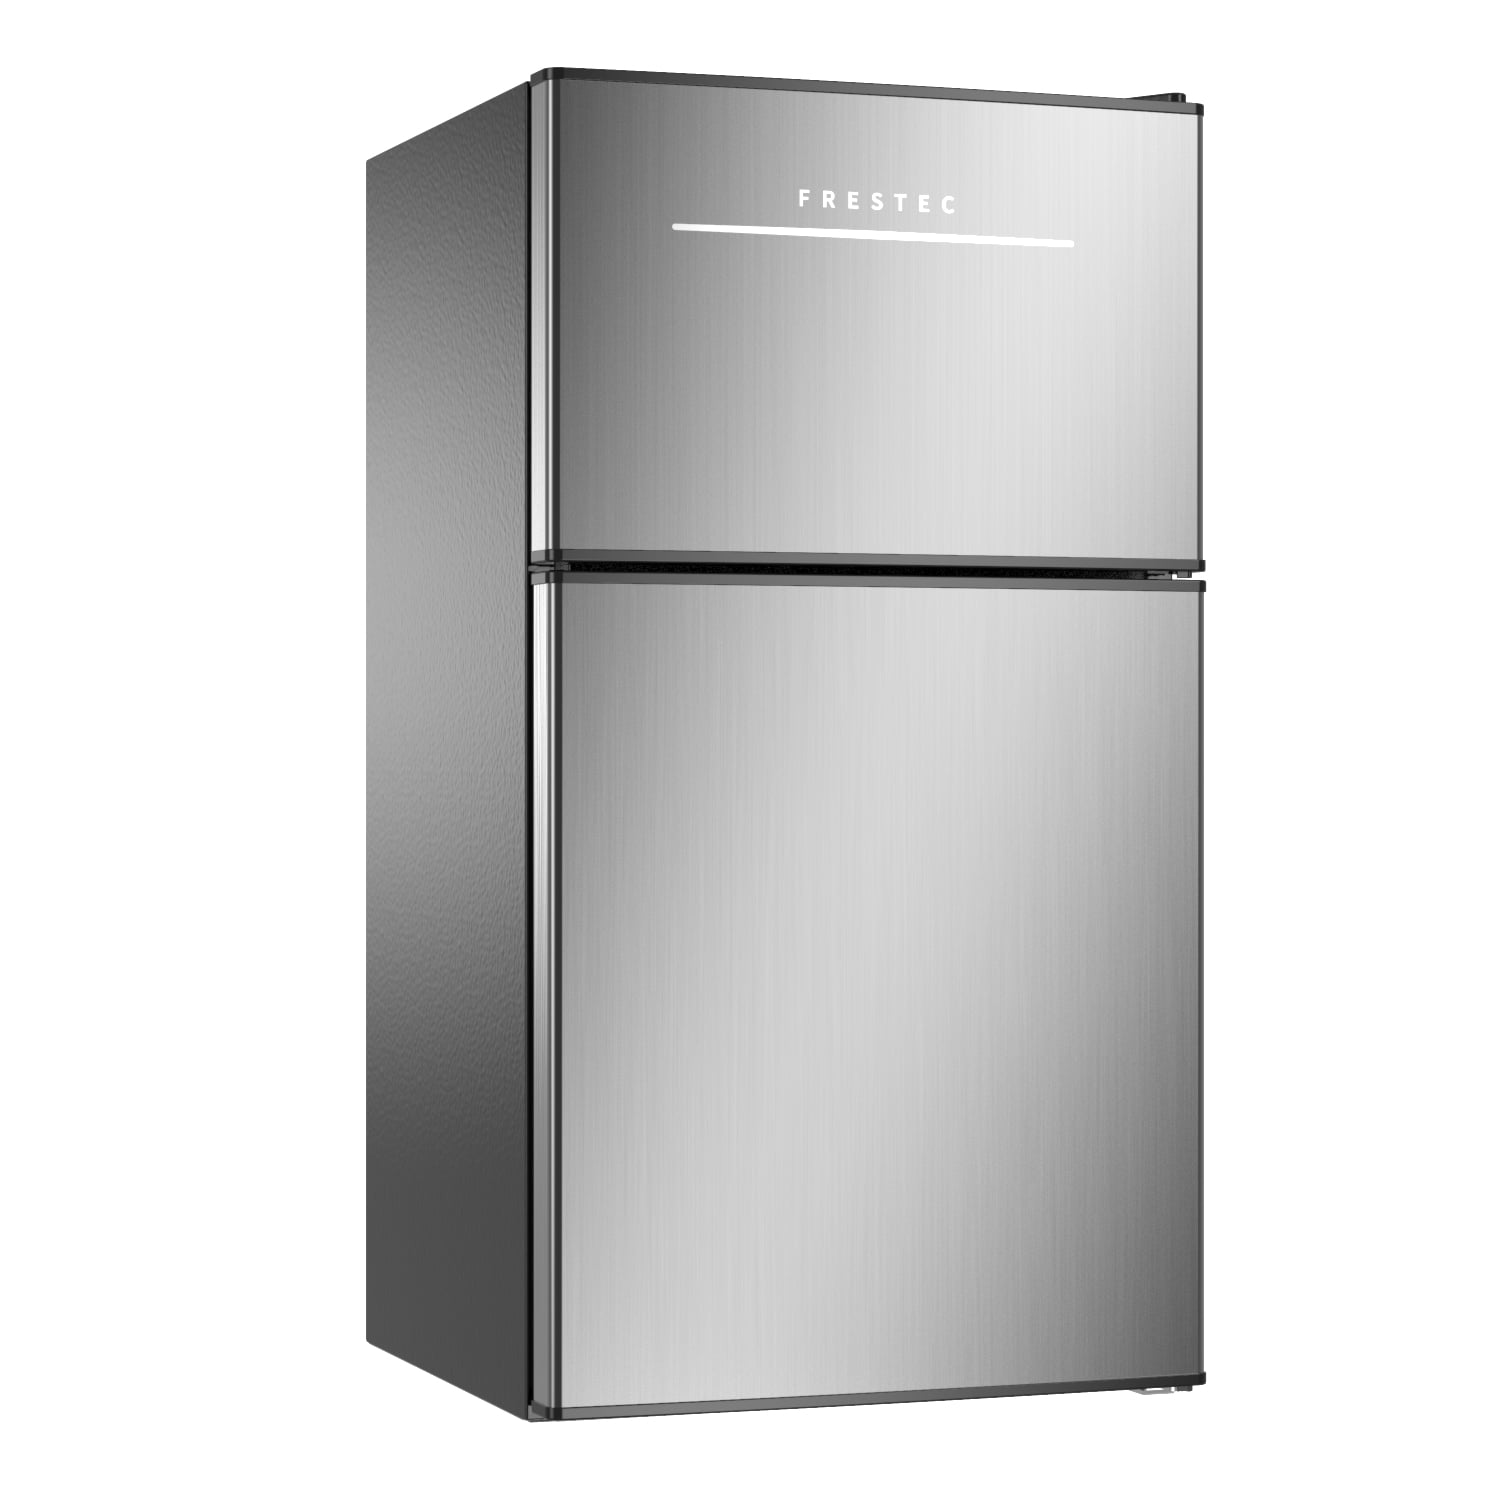 BANGSON Small Fridge with Freezer, 4.0 Cu.Ft, Samll Refrigerator with  Freezer, 5 Settings Temperature Adjustable, 2 Doors, Compact Fridge for  Apartment Bedroom Dorm and Office, Silver 